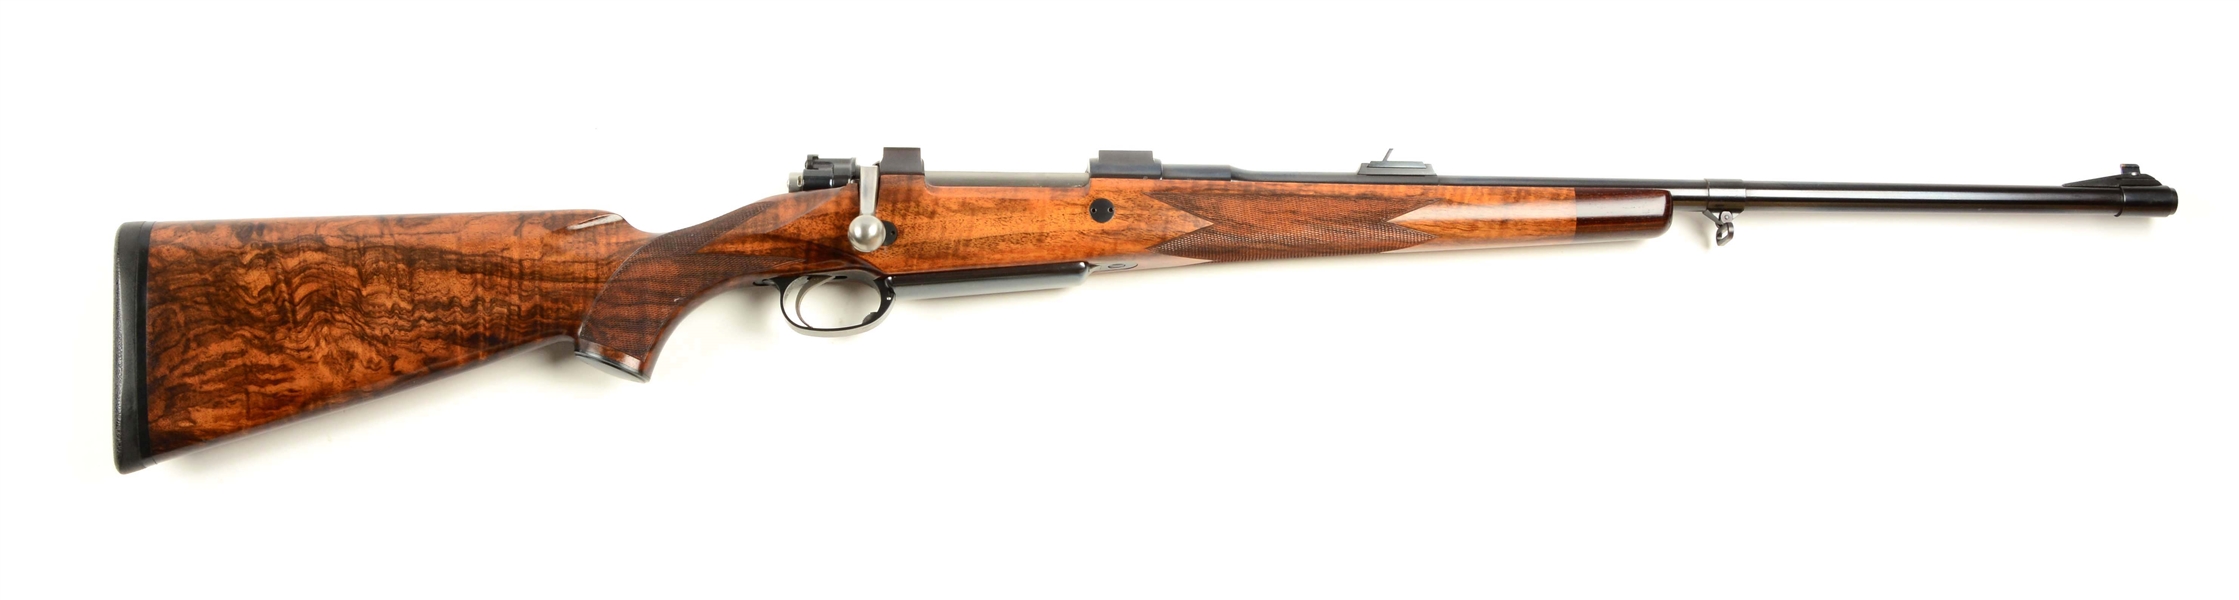 (M) FACTORY MAUSER .416 RIGBY BOLT ACTION RIFLE.